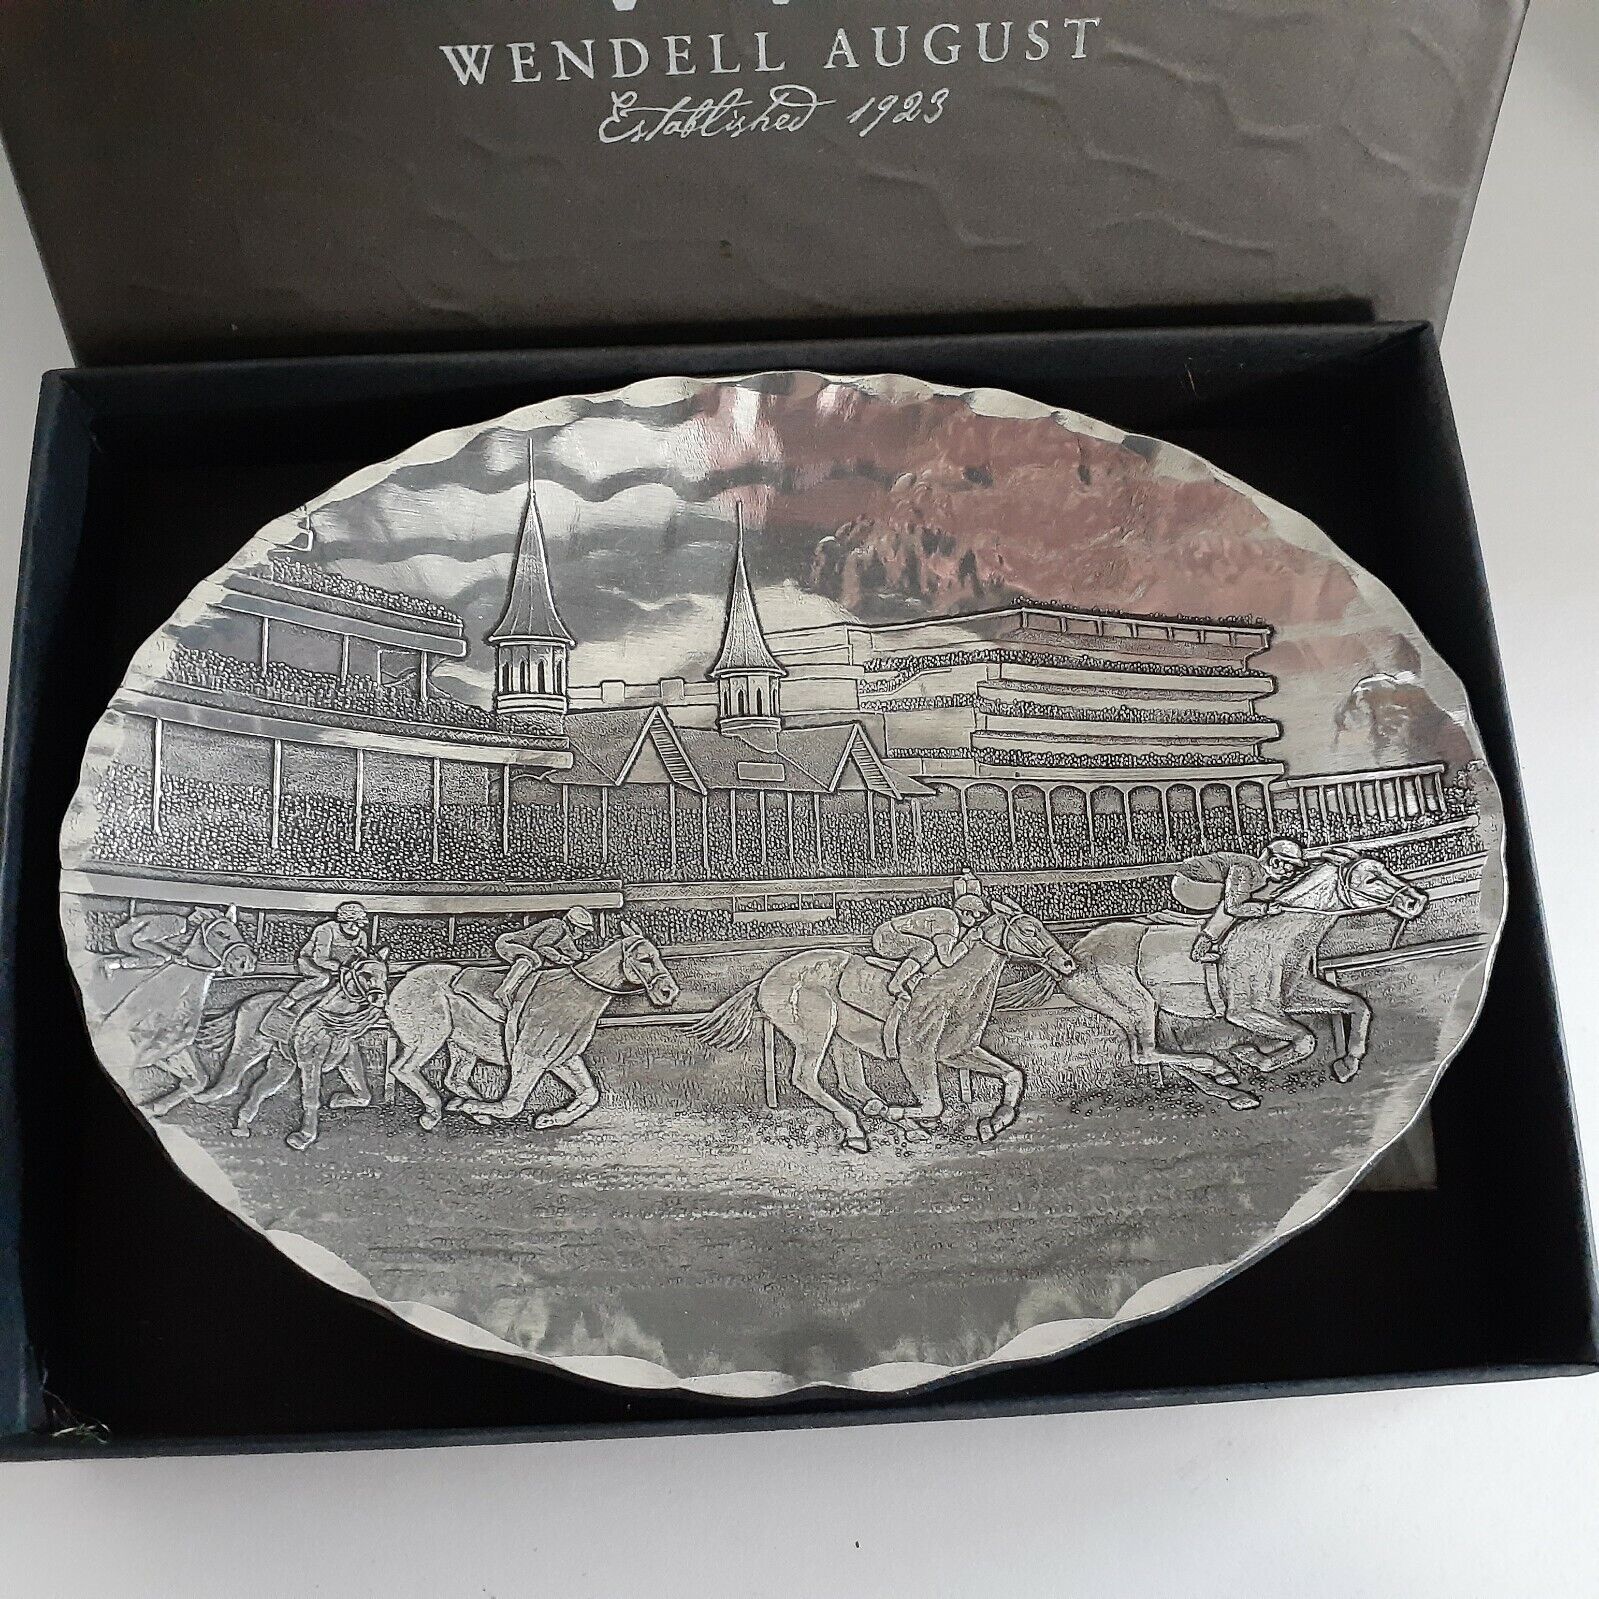 WENDELL AUGUST Forge, Kentucky Derby / Churchill Downs, Small Oval Tray, New/Box